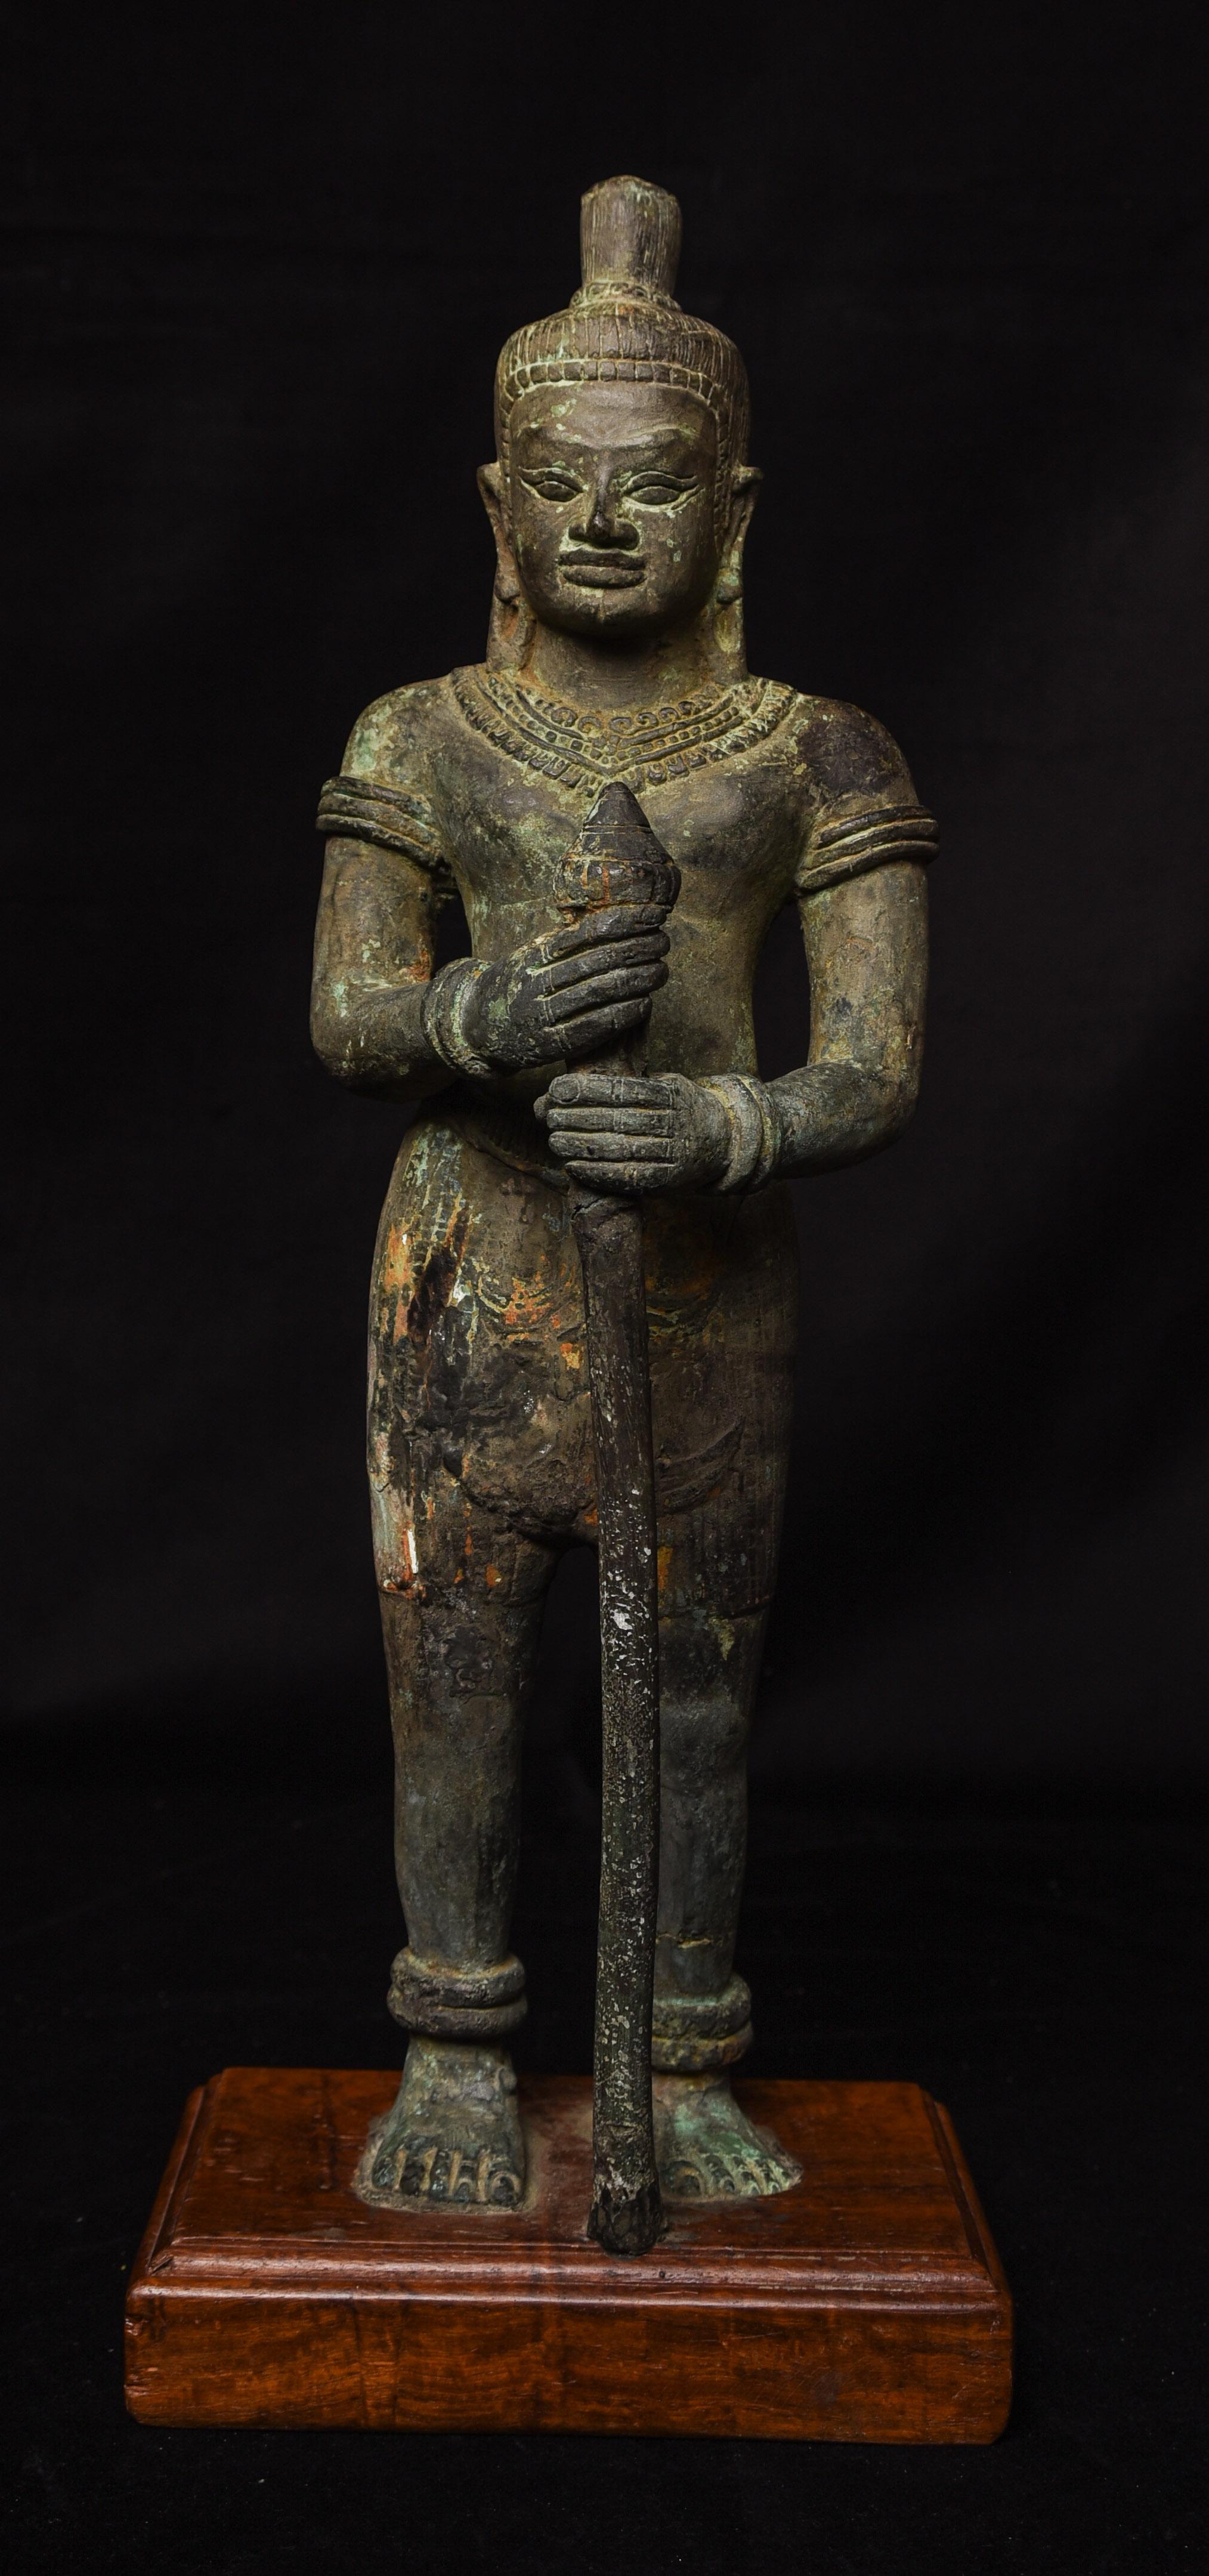 Large Well cast bronze 10-11thC Cambodian Khmer Era  Guardian Figure. The dating may be a century or two earlier or later, but this is a large, Angkor Wat period piece.  Wear as seen in the photos.  - 19